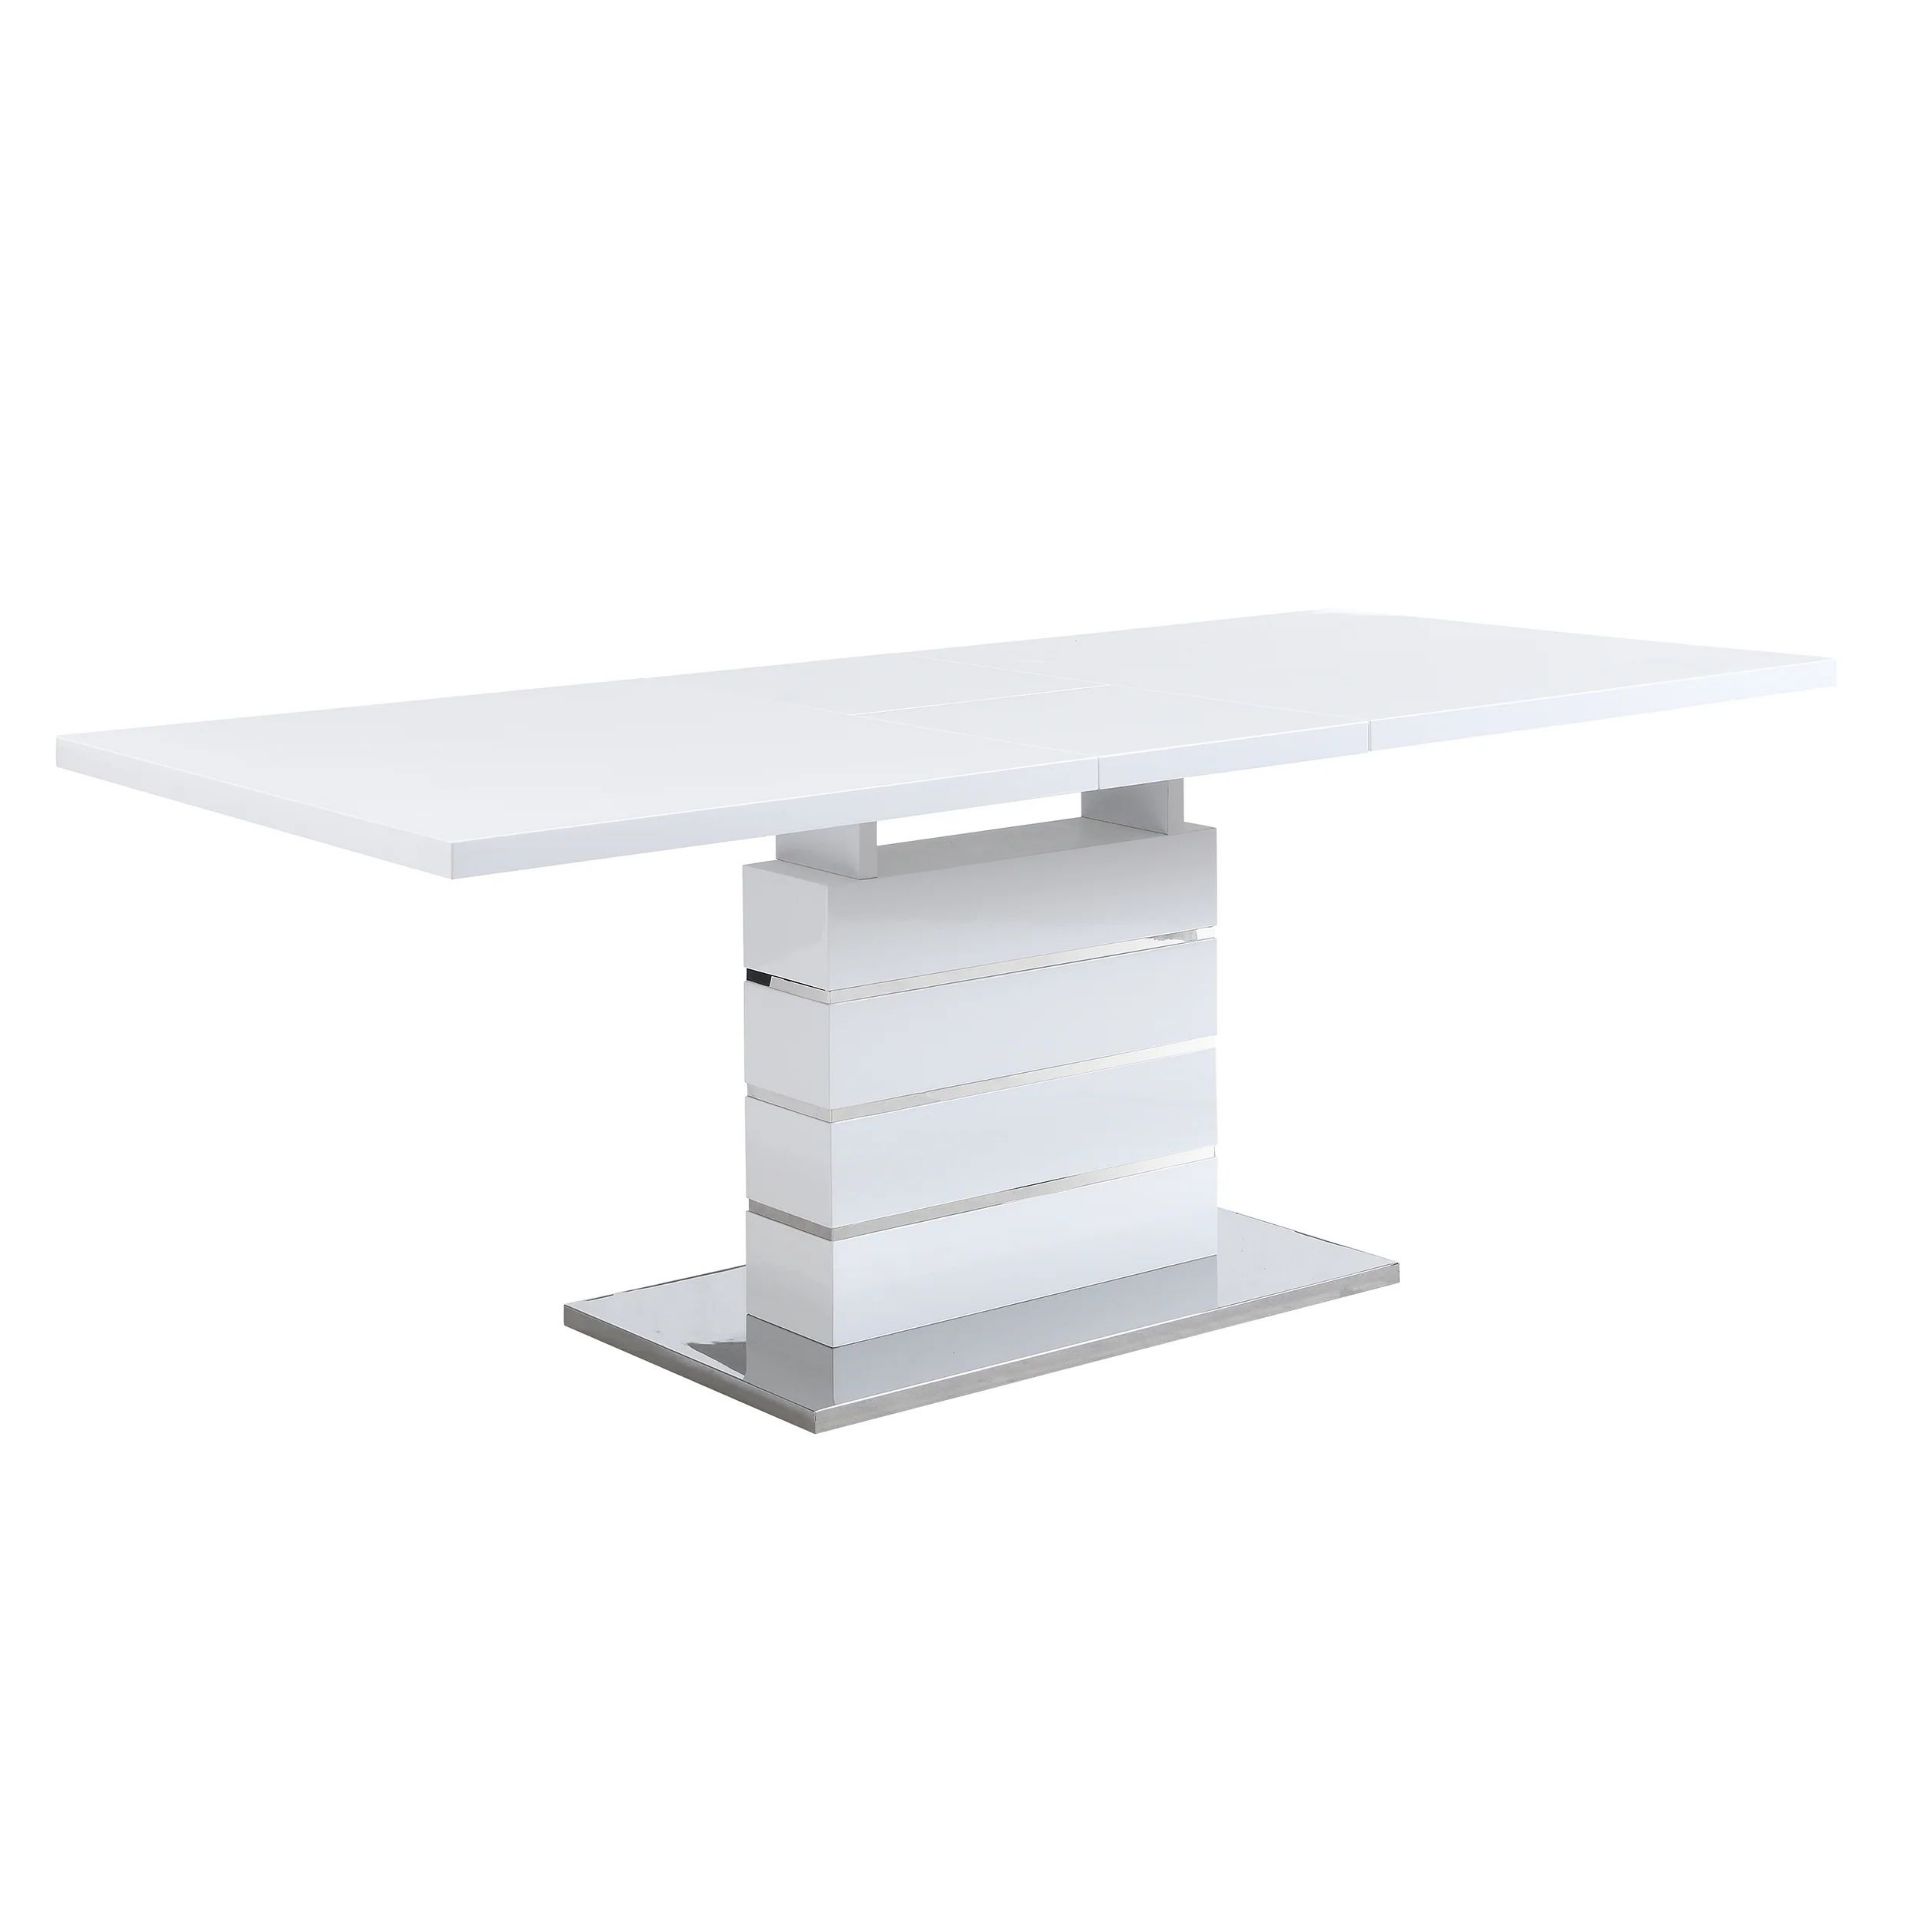 Hayne High Gloss White Extending Dining Table 6 to 8 Seater. - BI. RRP £449.99. The Hayne table is a - Image 2 of 2